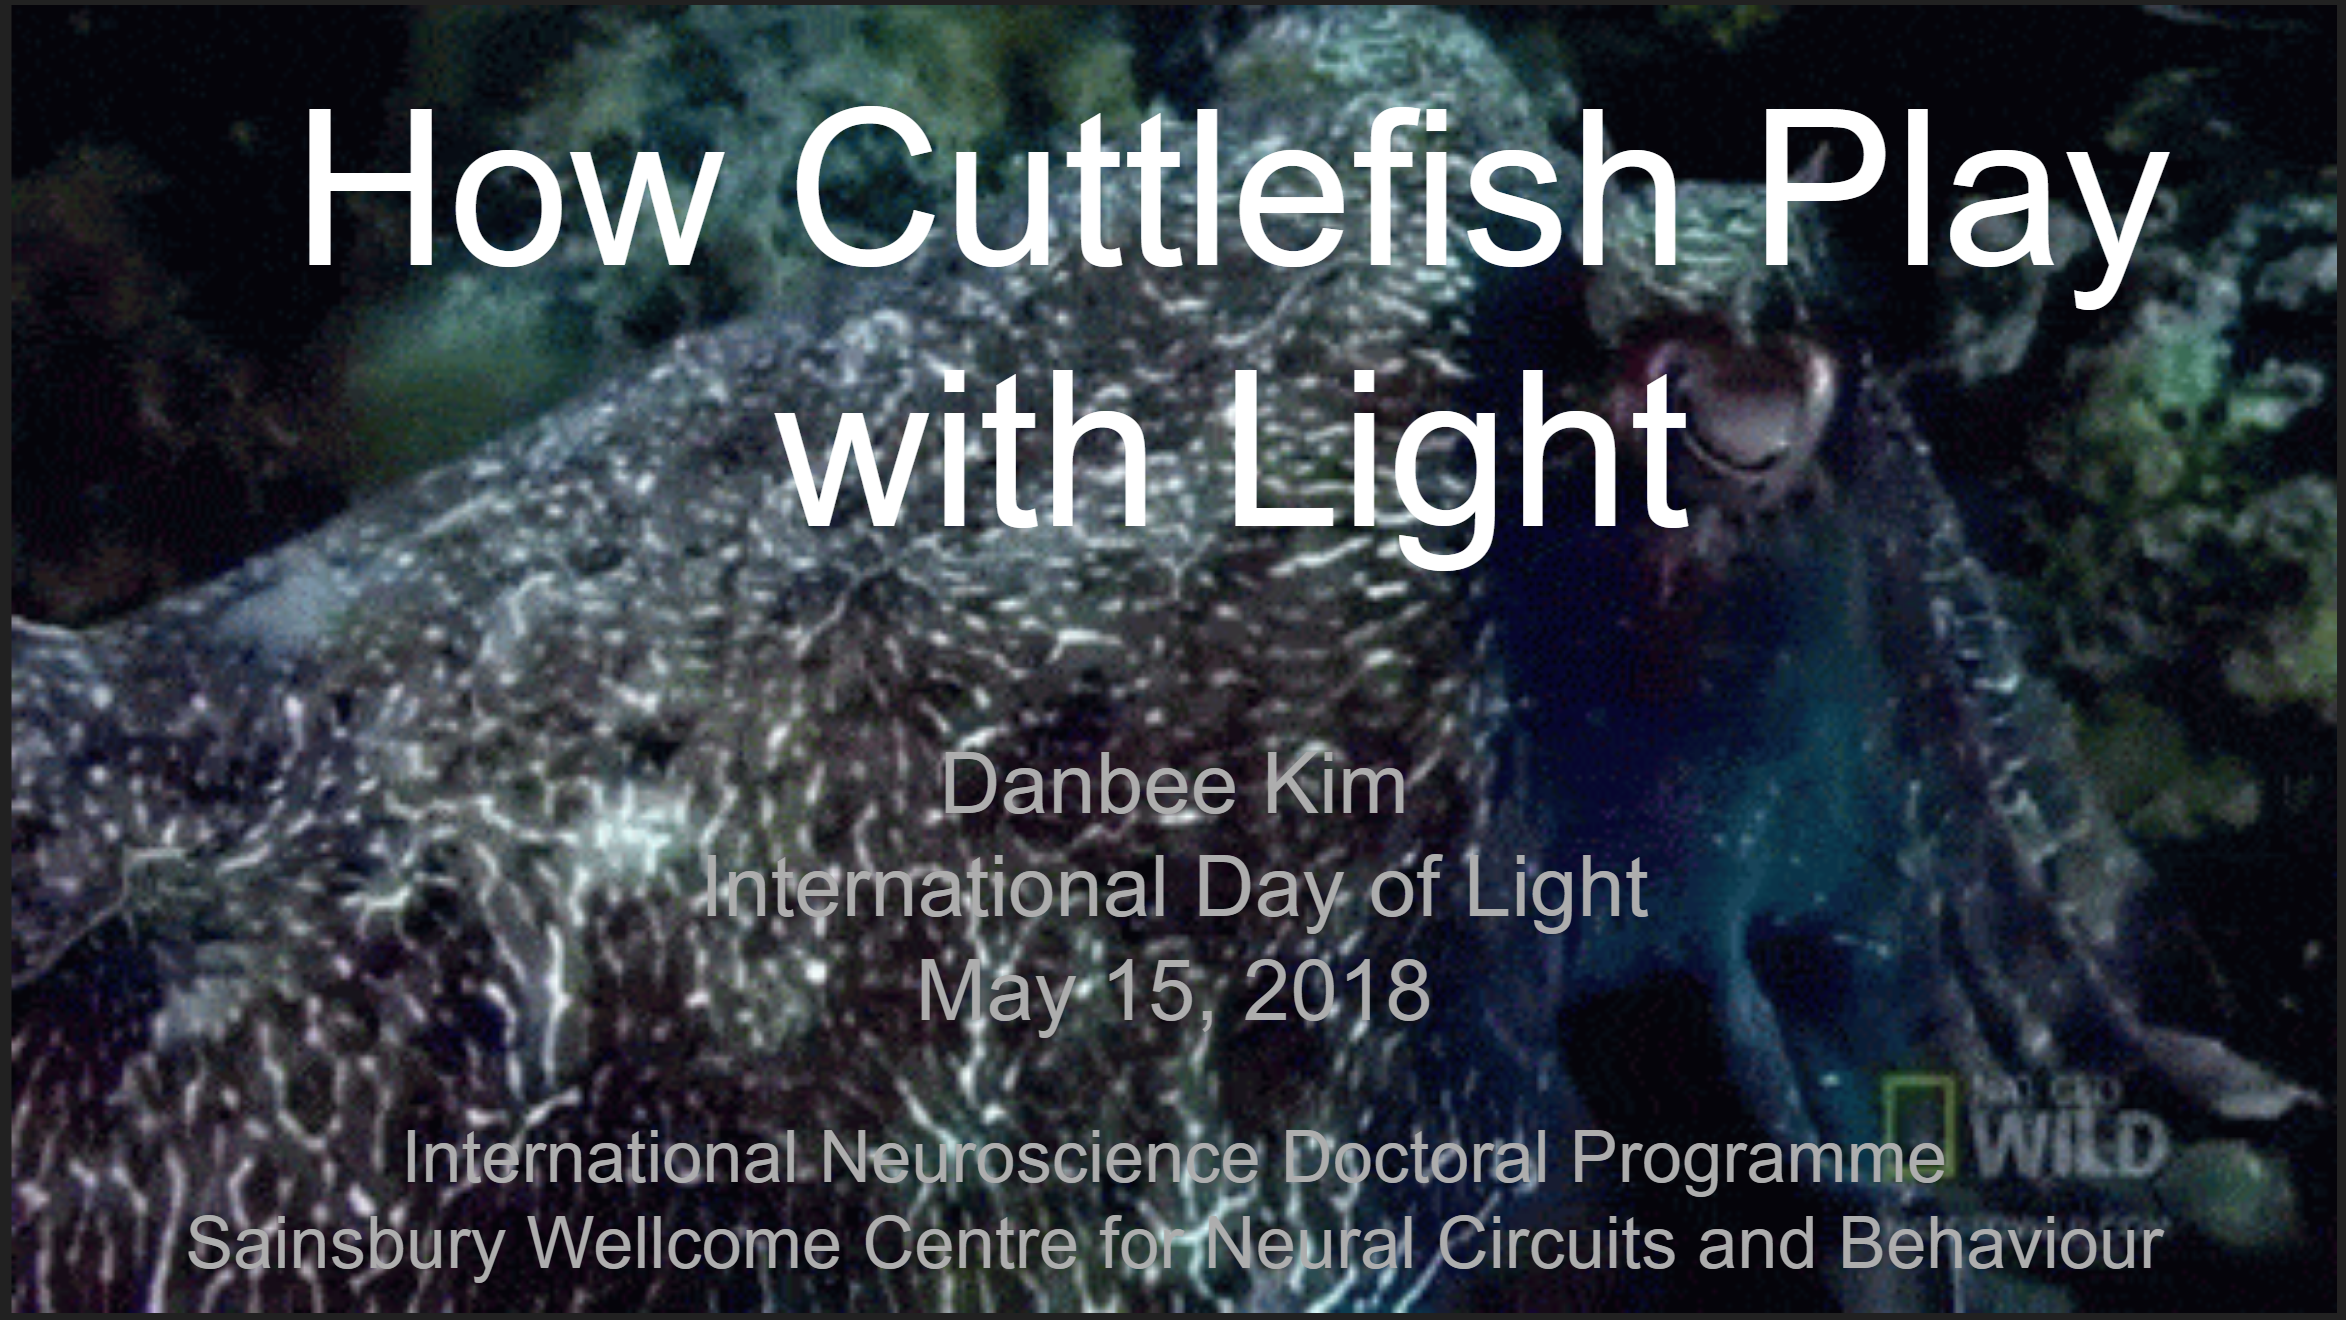 Danbee talks about cuttlefish at UCL's 2018 International Day of Light celebration.